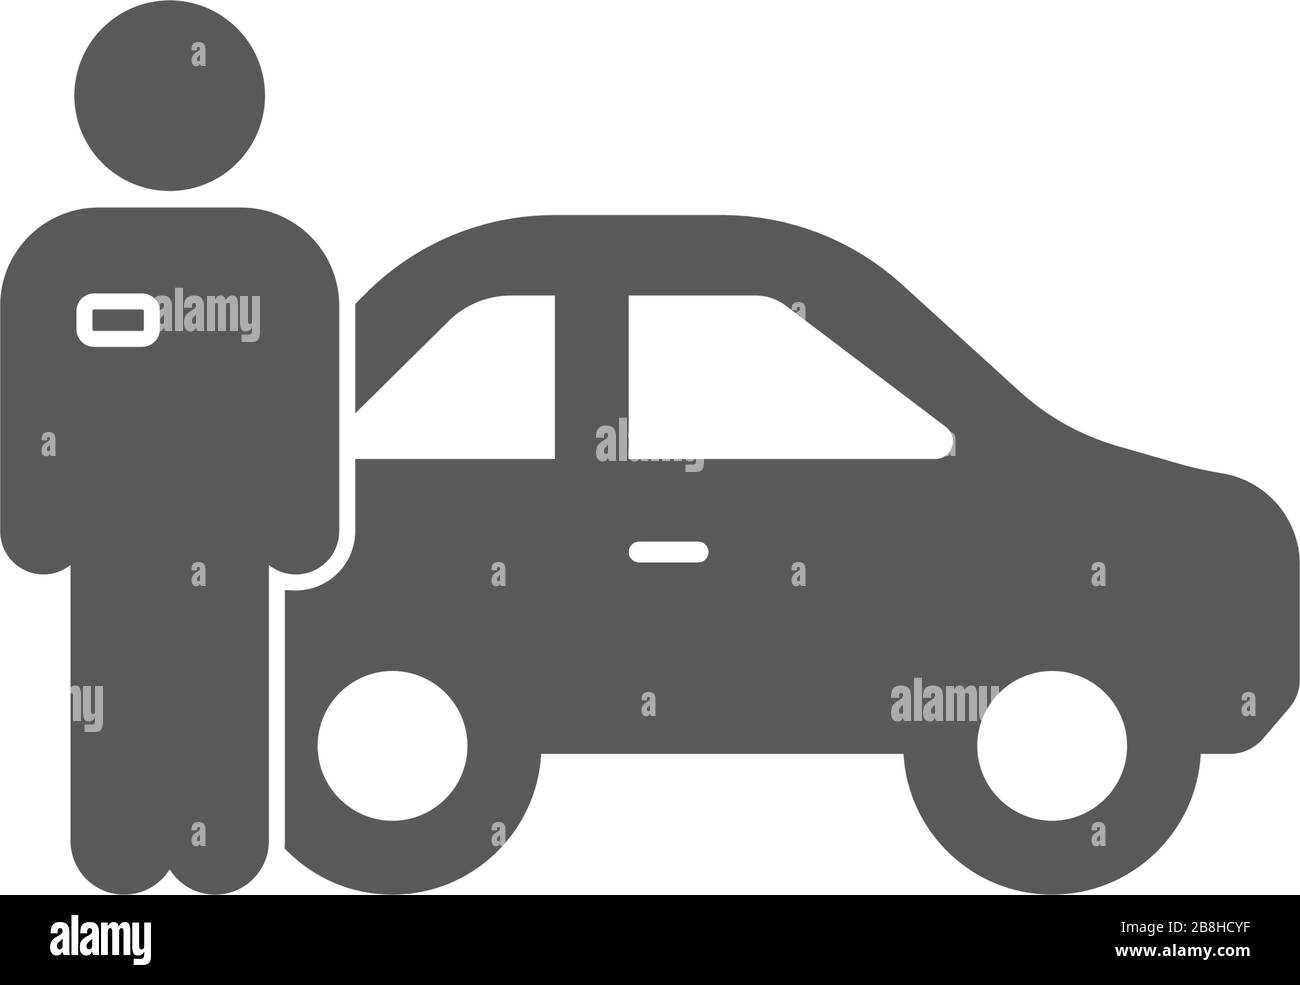 valet parking vector icon concept, isolated on white background Stock Vector